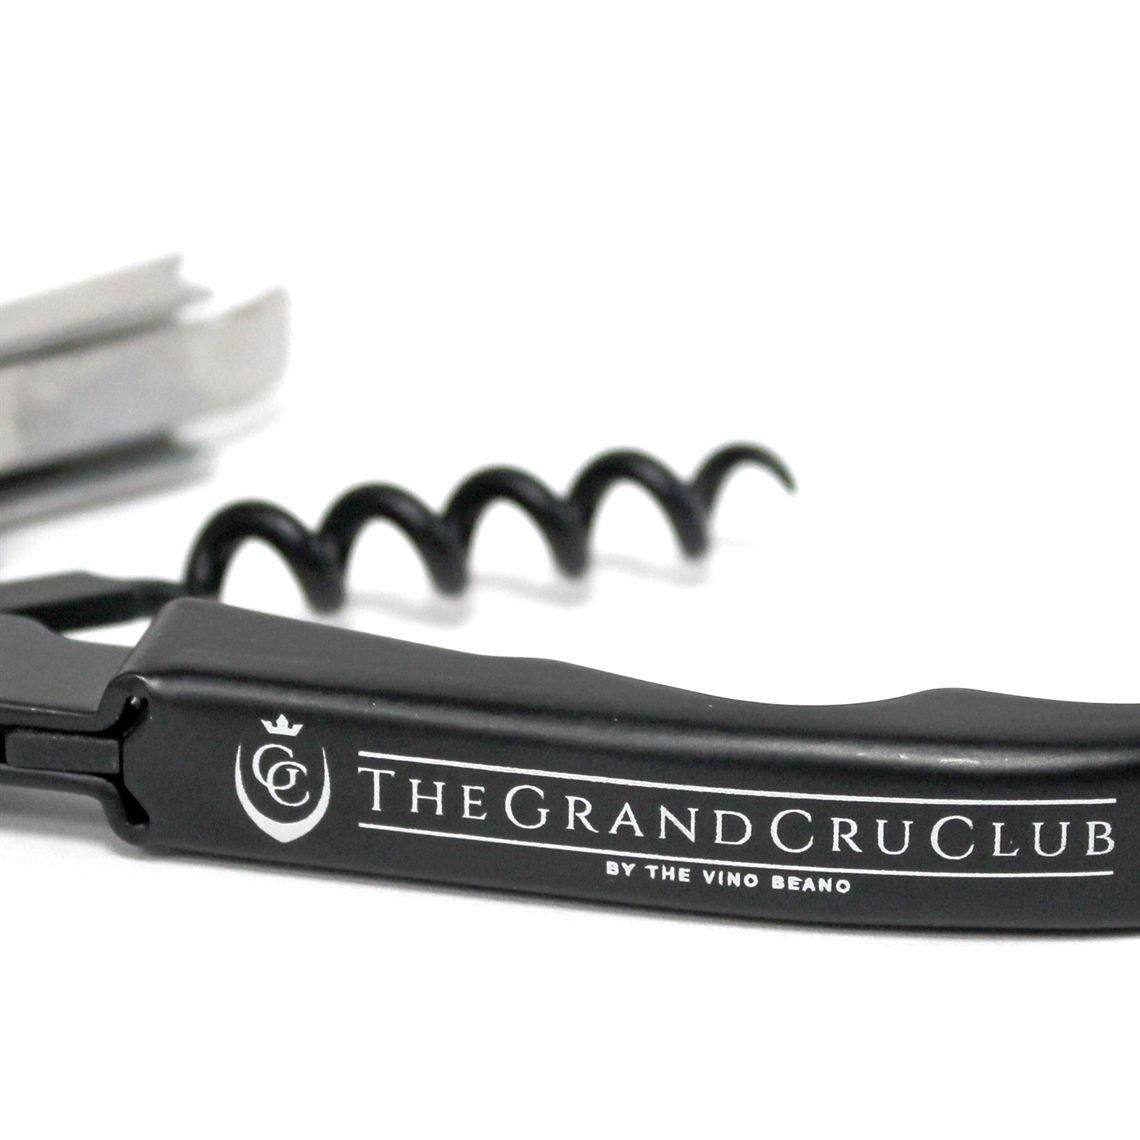 View more le creuset / screwpull from our Branded Corkscrews & Bottle Openers range